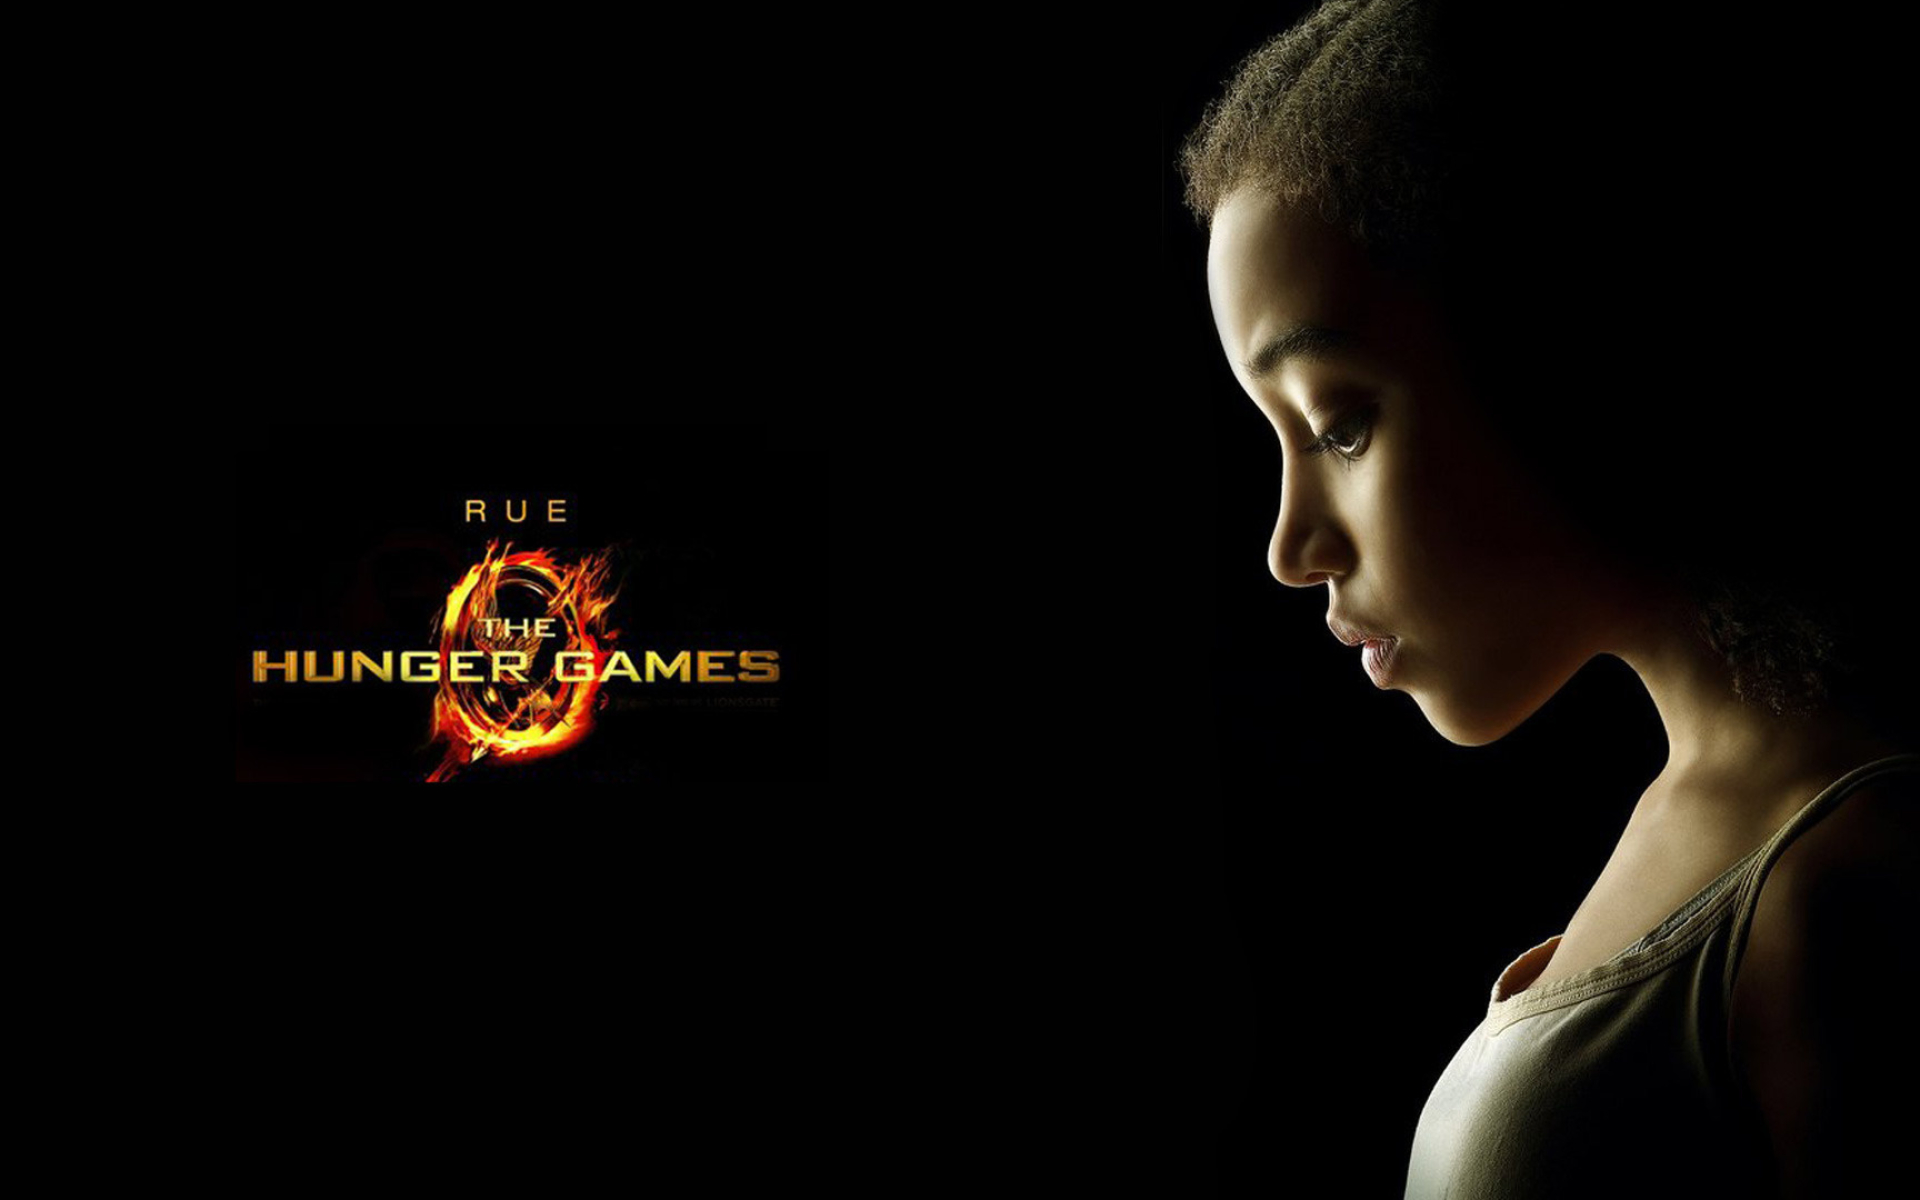 Hunger Games: Rue, the District 11 female tribute, portrayed by Amandla Stenberg. 1920x1200 HD Wallpaper.